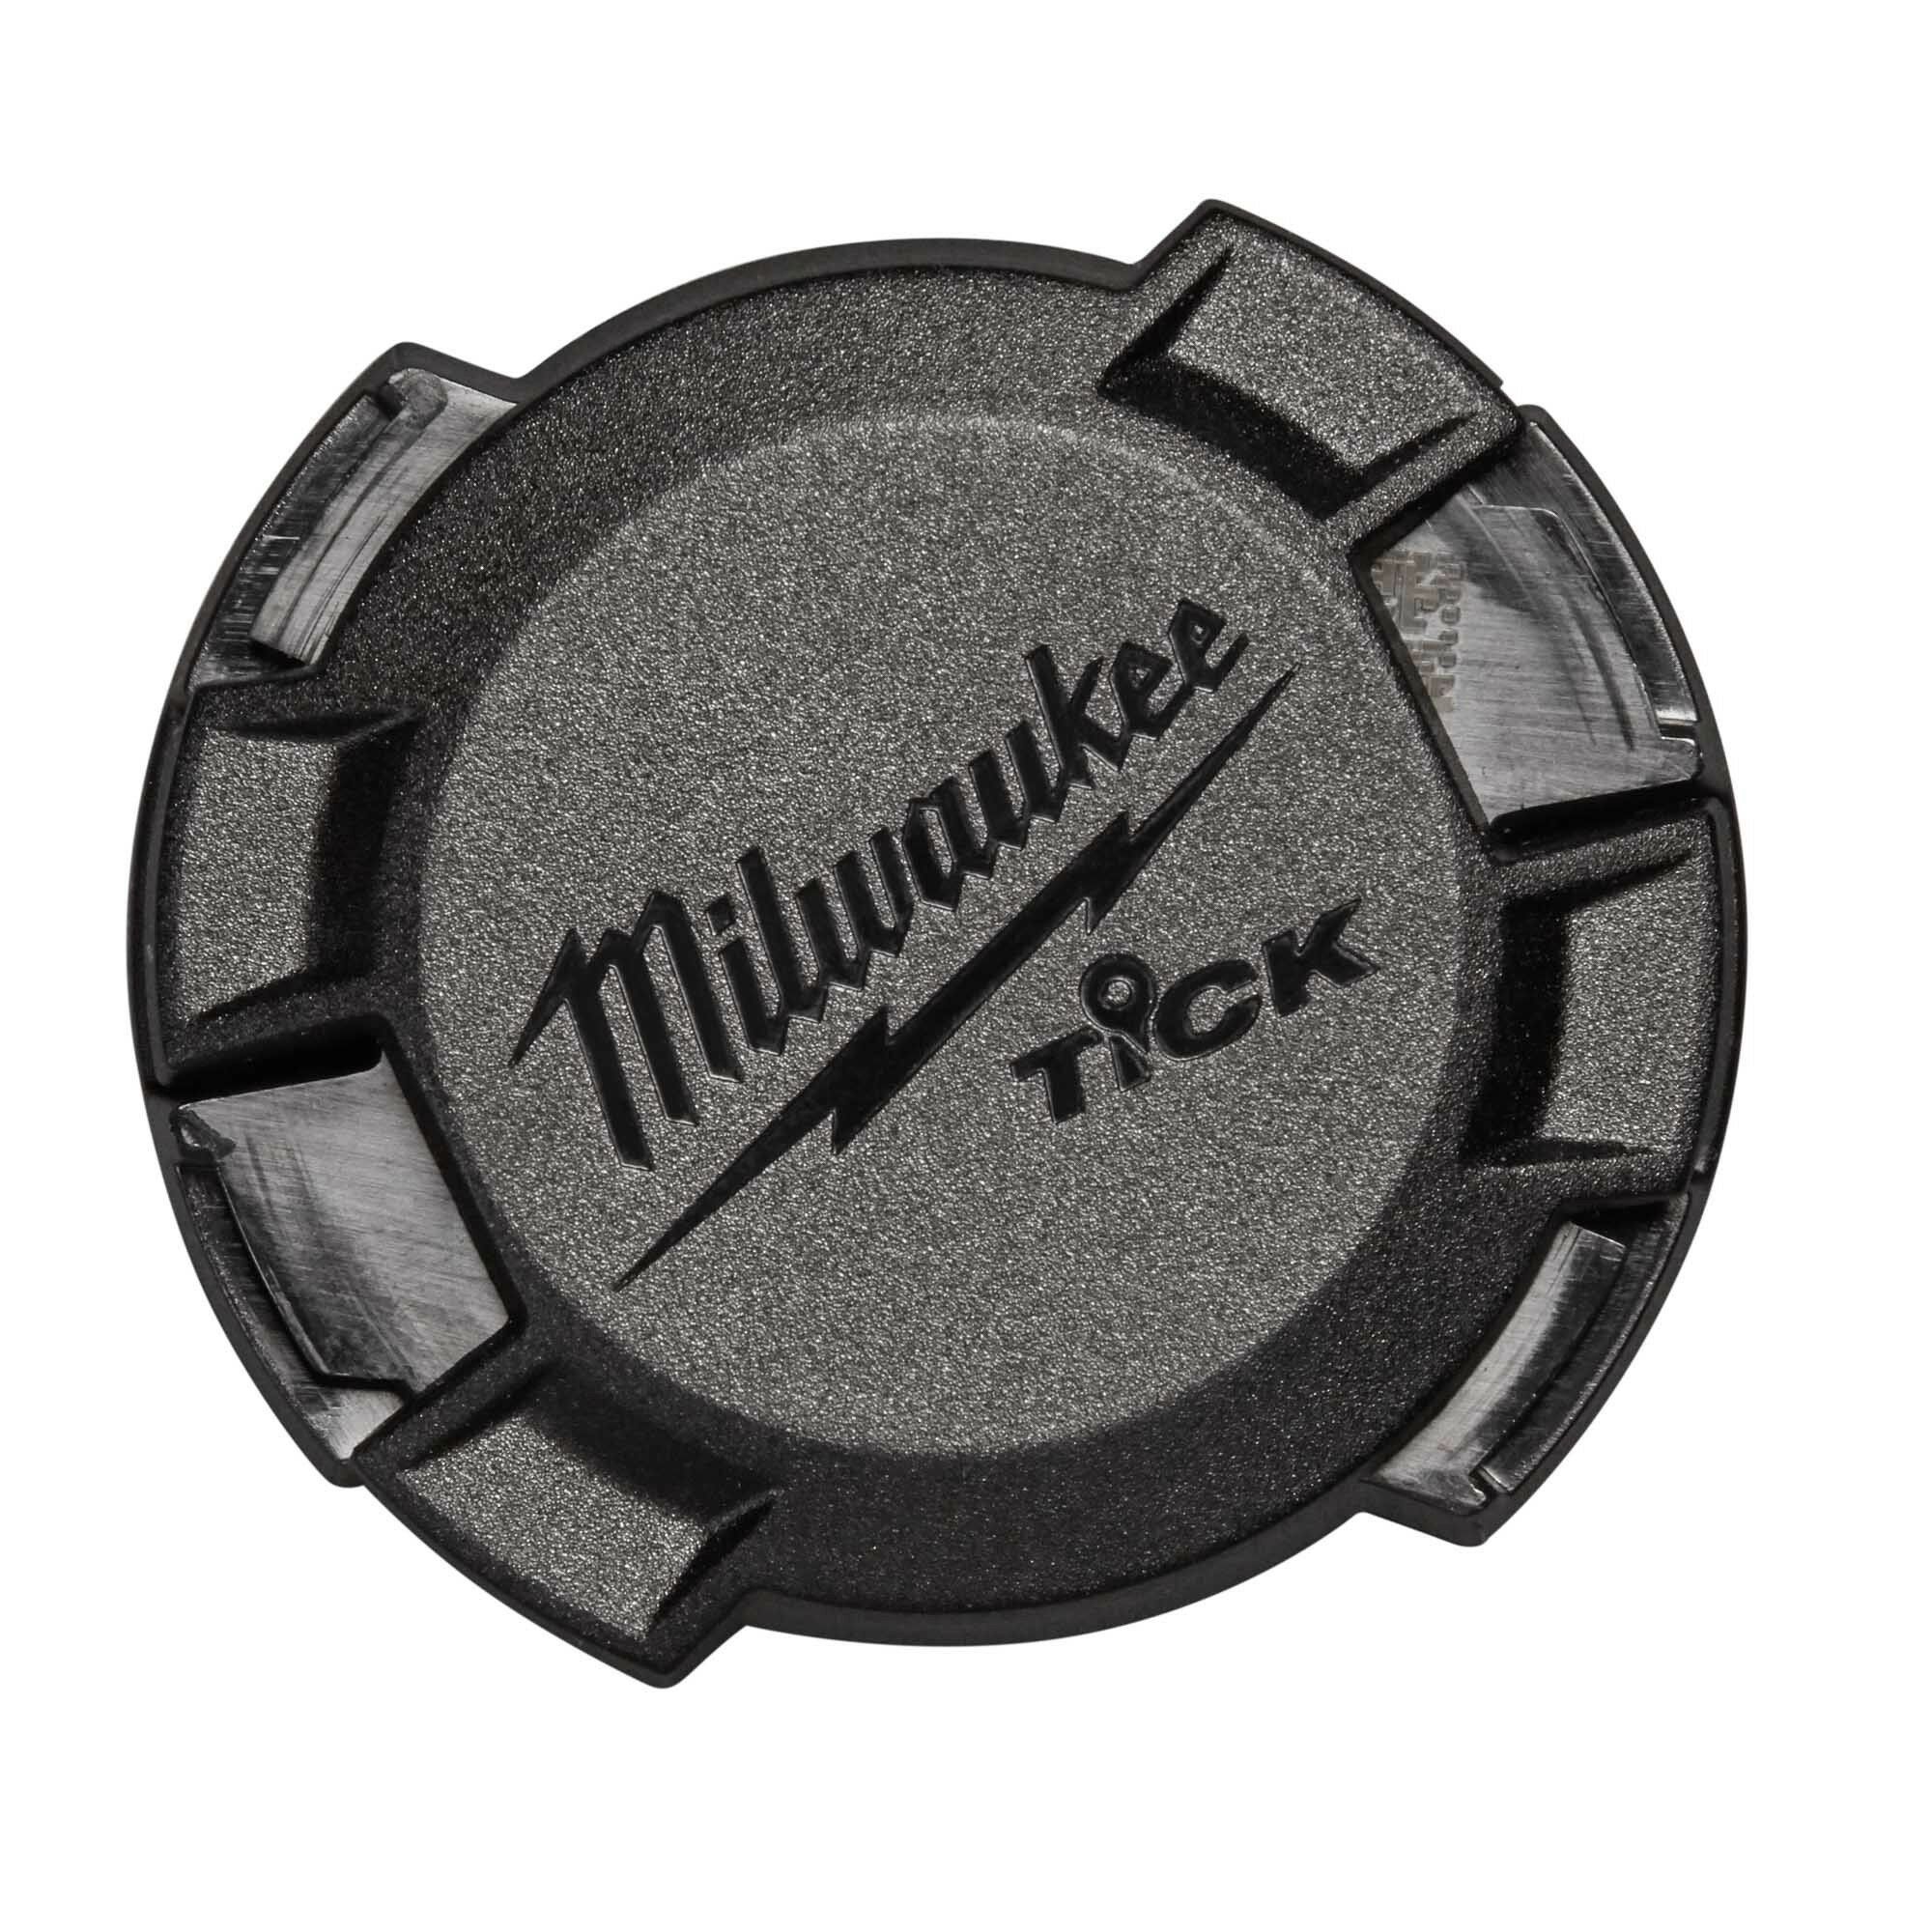 Milwaukee BTM-1 TICK-Bluetooth Tracking Module for Milwaukee Powertools  compatible with the ONE-KEY App